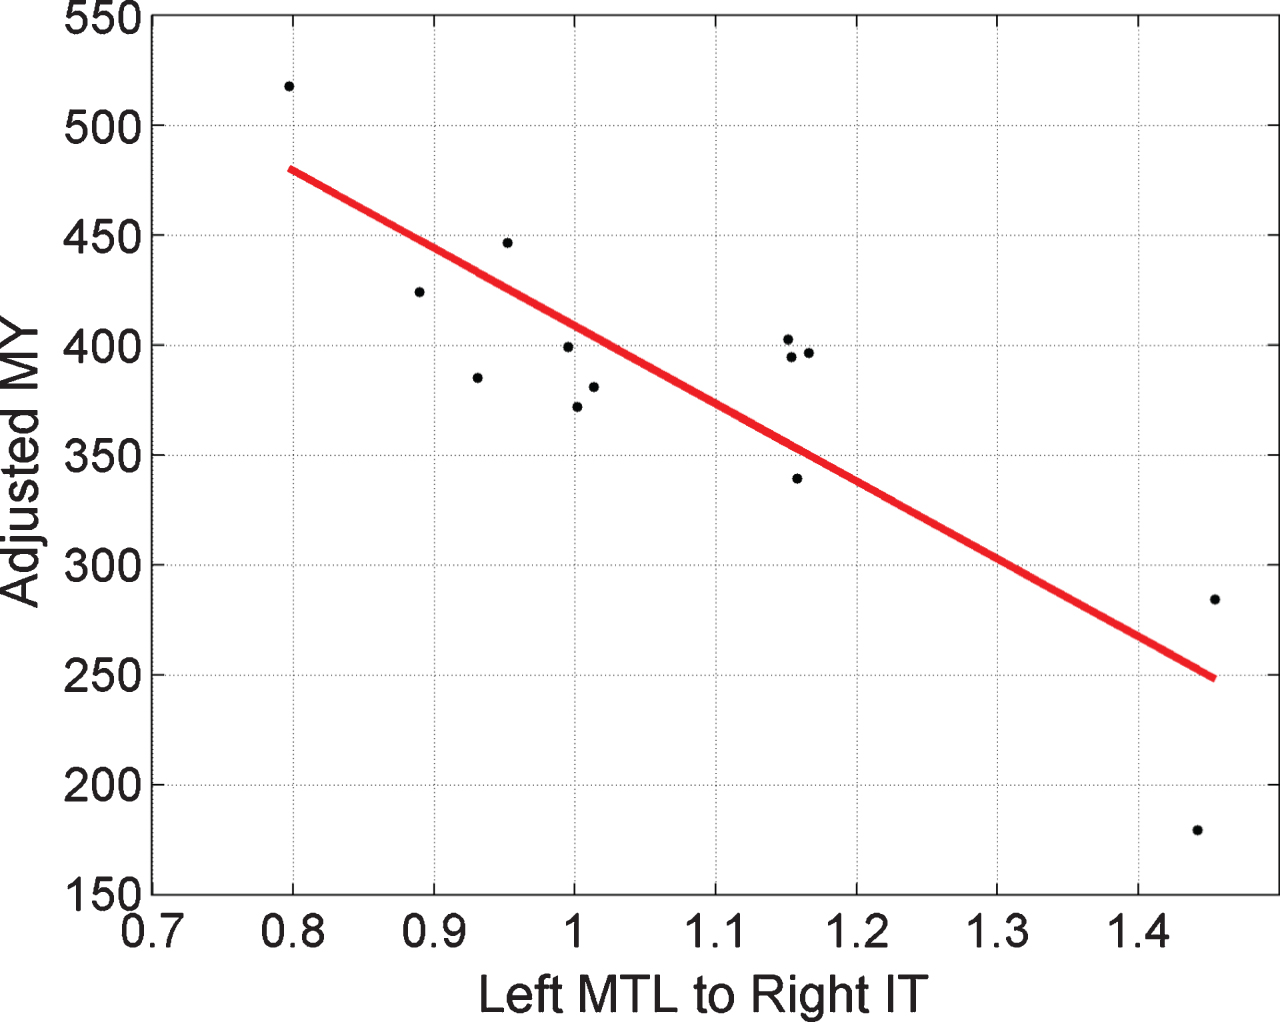 Regressing MMSE-Years onto brain connectivity. Stronger activation of the Left MTL to Right IT pathway, ā, is associated with smaller MY values. A value of ā = 1 corresponds to the prior mean value. Here, the x-axis corresponds to pathway strength for congruent items. Adjusted MY is the MY score computed as the area under the MMSE trajectory curves (over the period 1999 to 2015) shown in Fig. 2 but adjusted for the effects of age and performance using multiple regression as described in Supplementary Material 5. The Left MTL to Right IT value is a parameter of a DCM fitted to EEG data acquired in 1999.